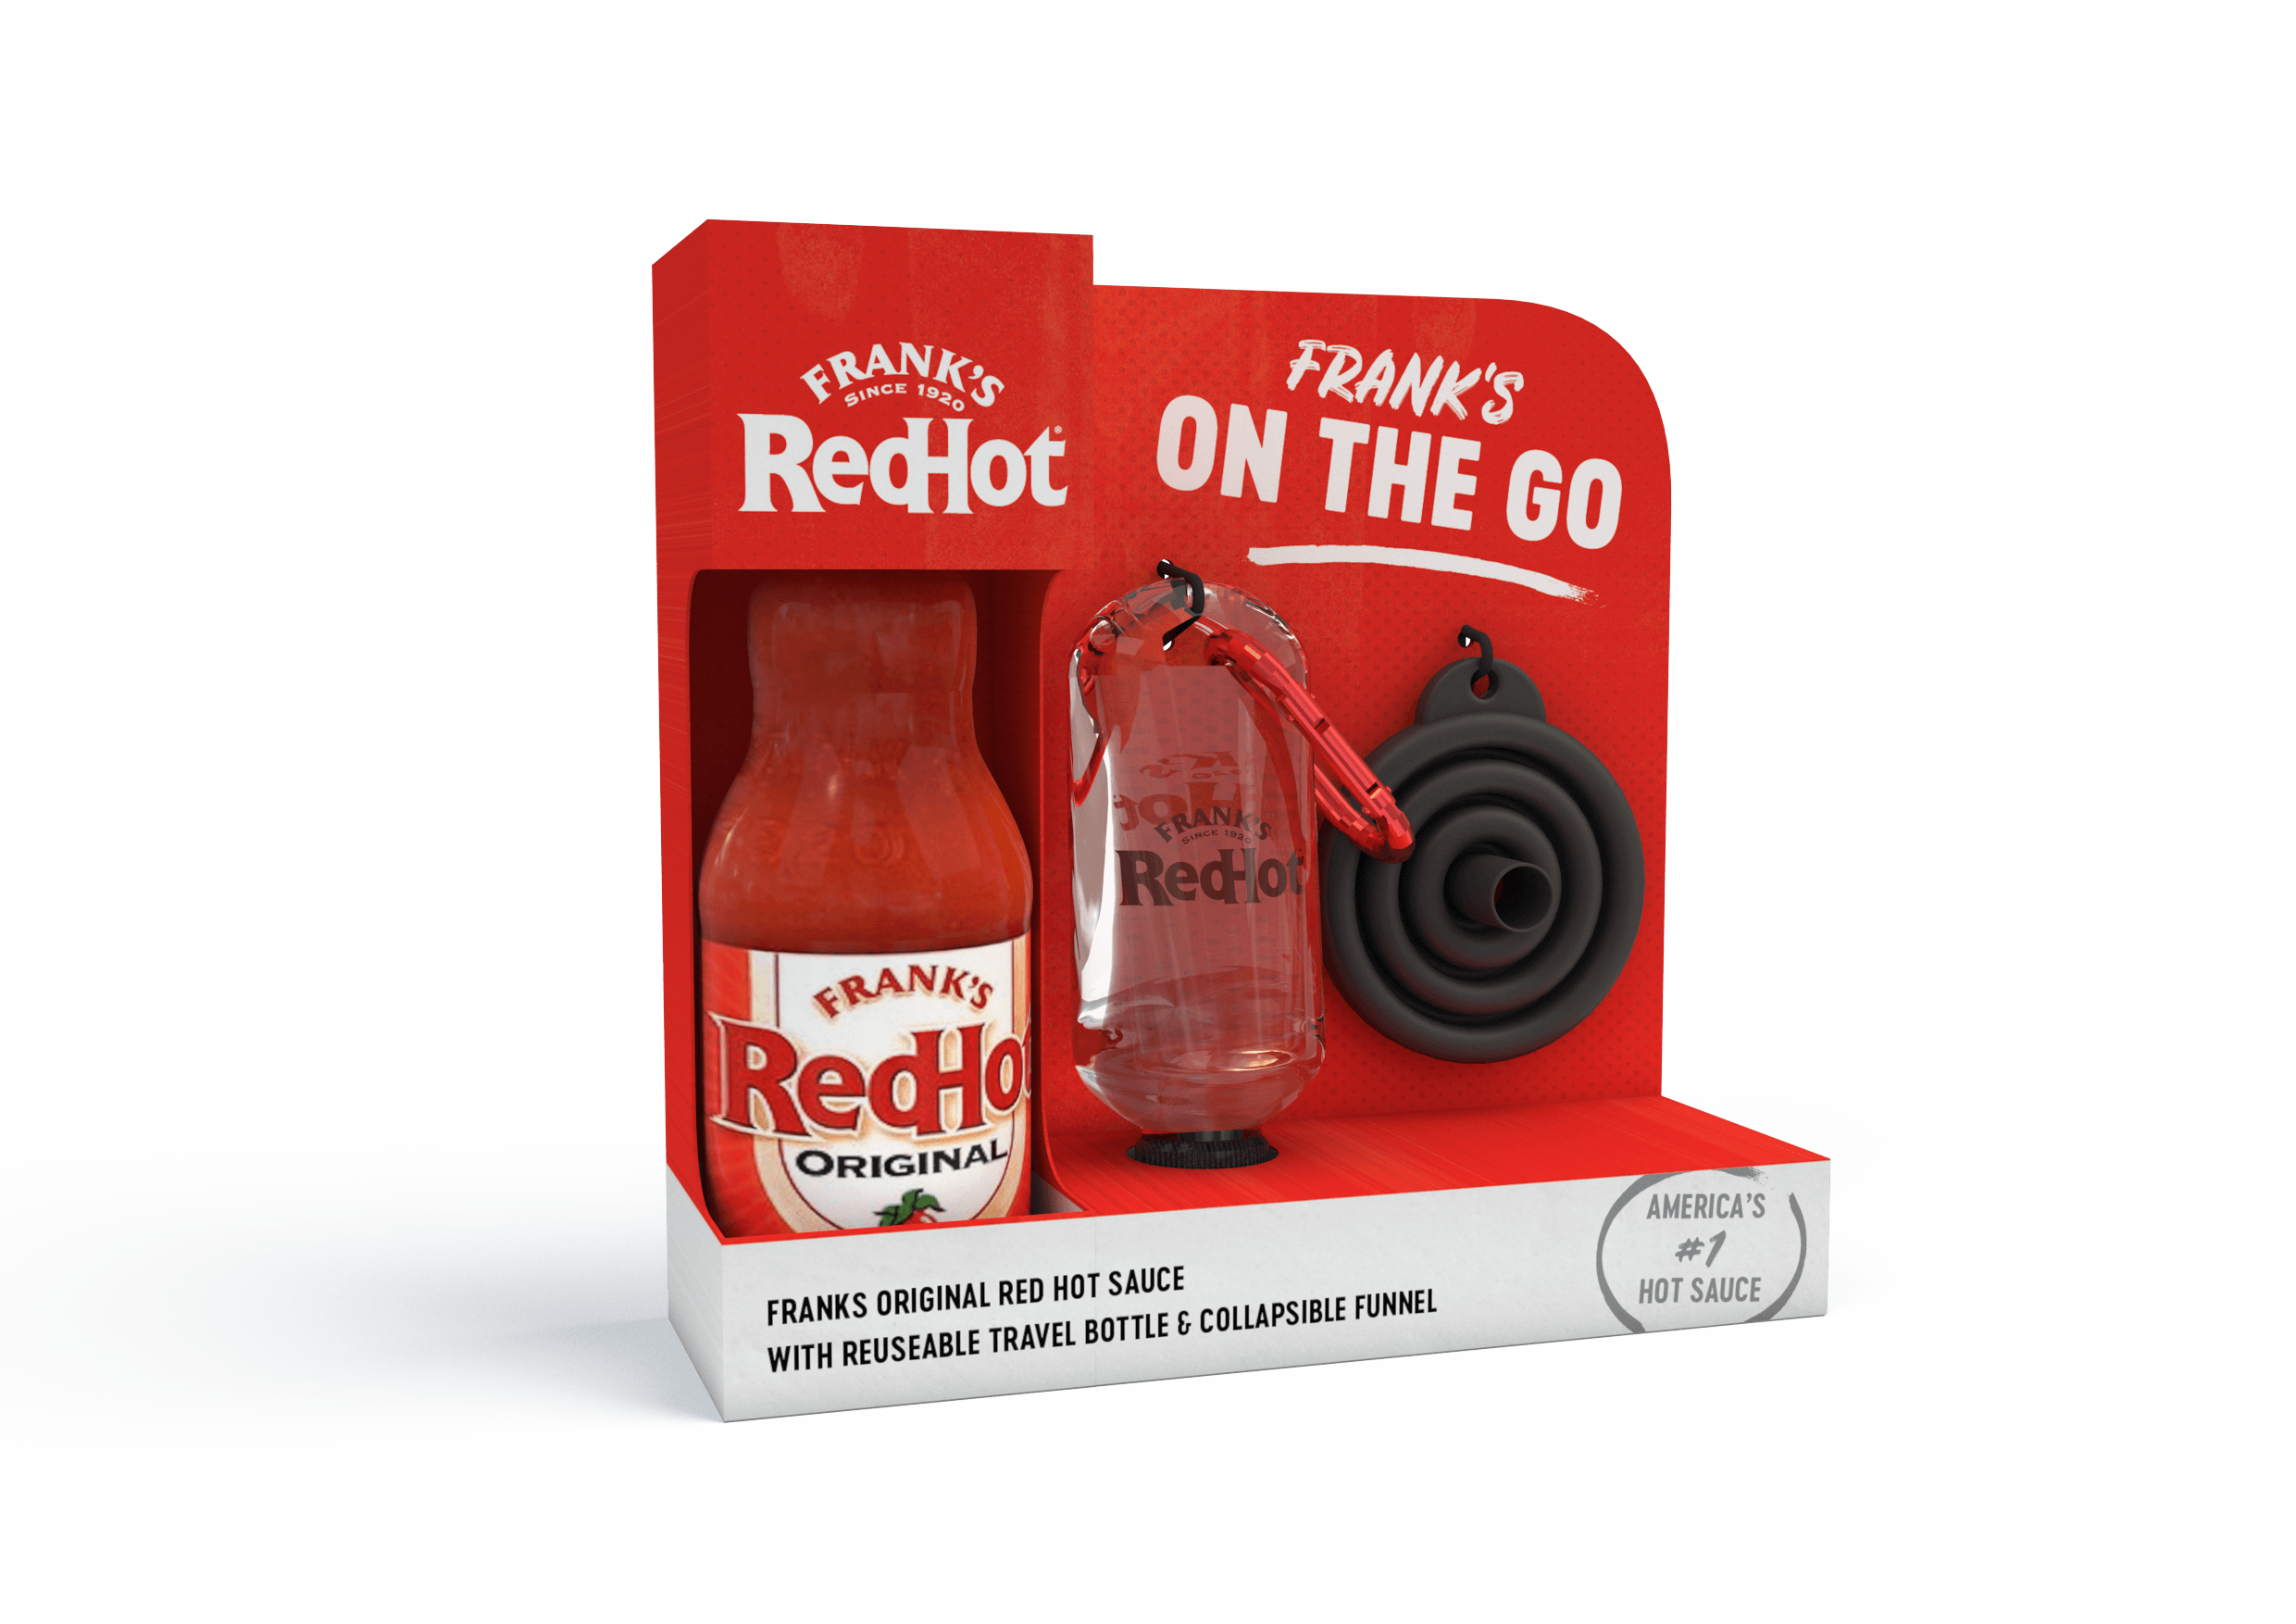 Food Gifting from Schwartz & Franks RedHot